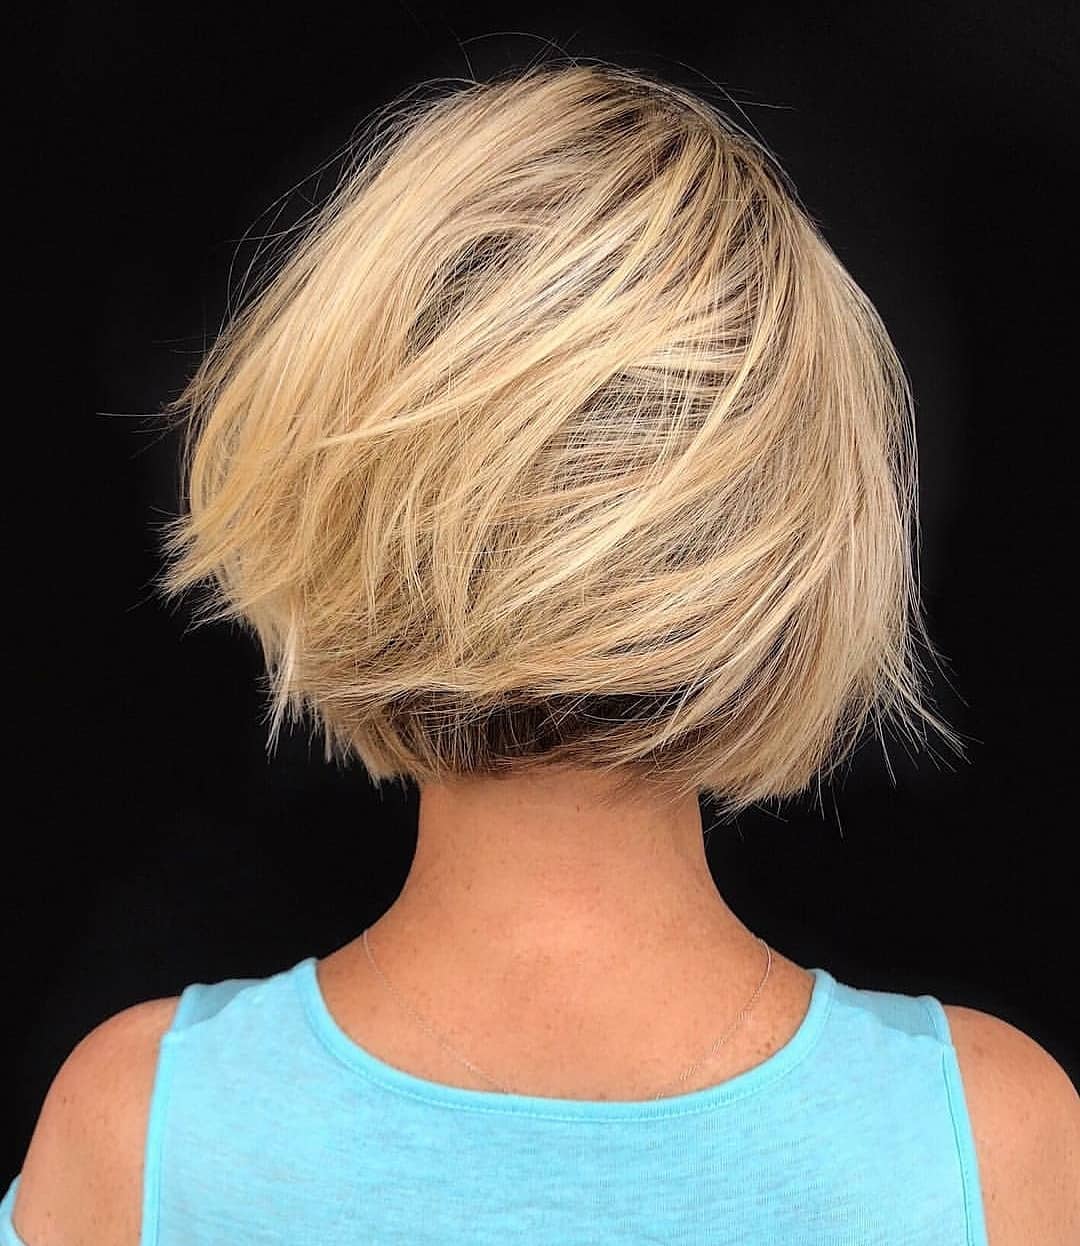 Top 10 Low Maintenance Short Bob Cuts For Thick Hair Short Hairstyles 2021